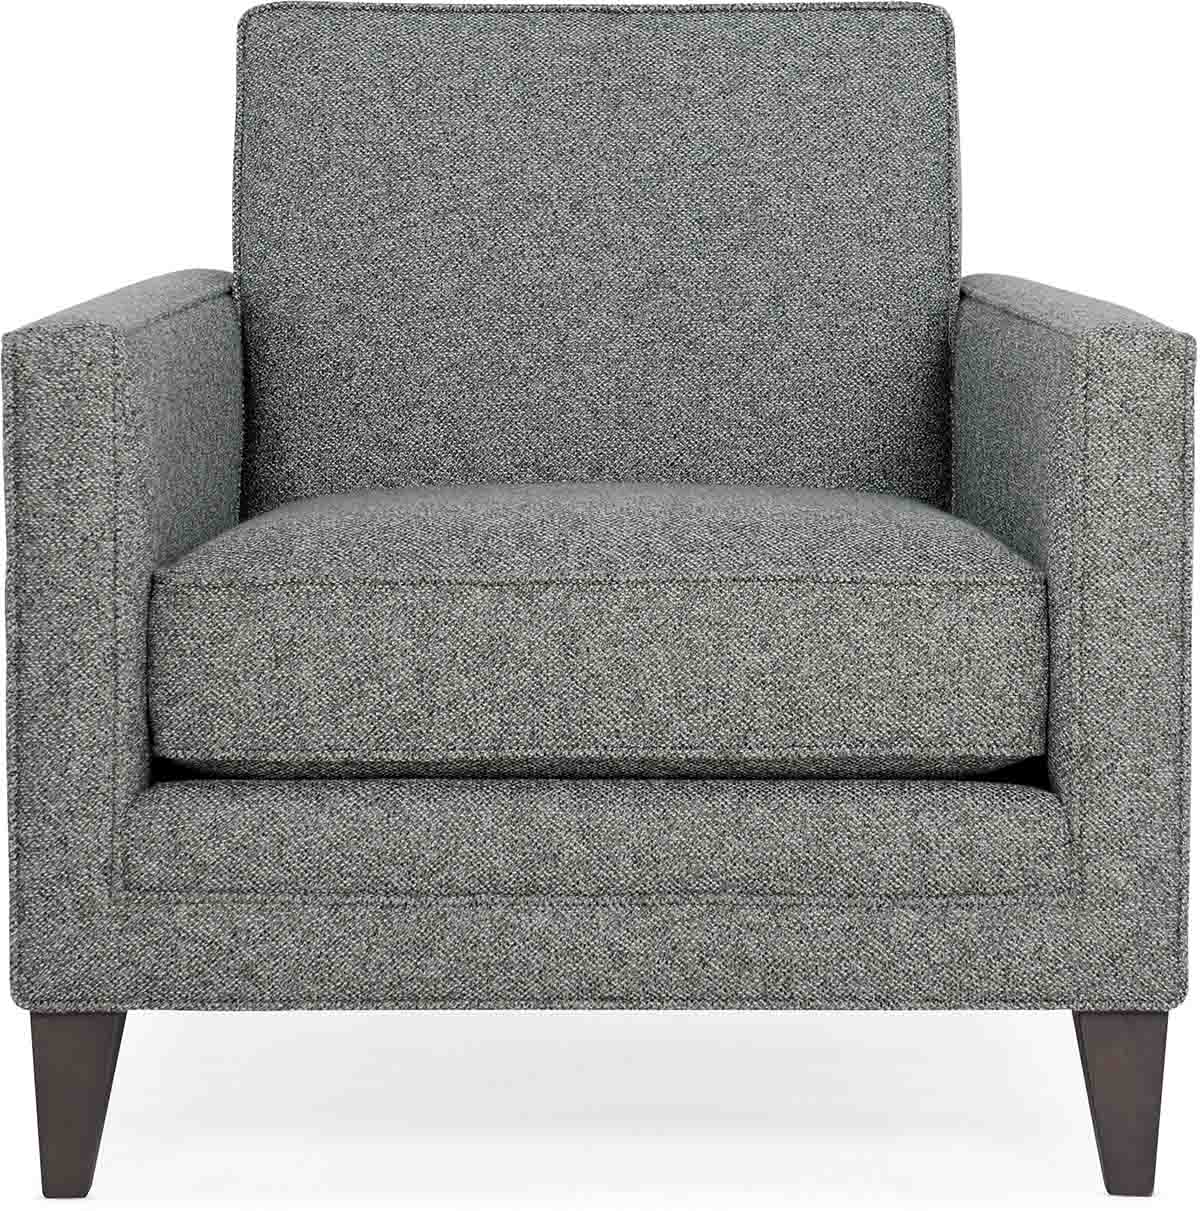 MARQ Living Room Elana Accent Chair with Arms - Dreamart Gallery